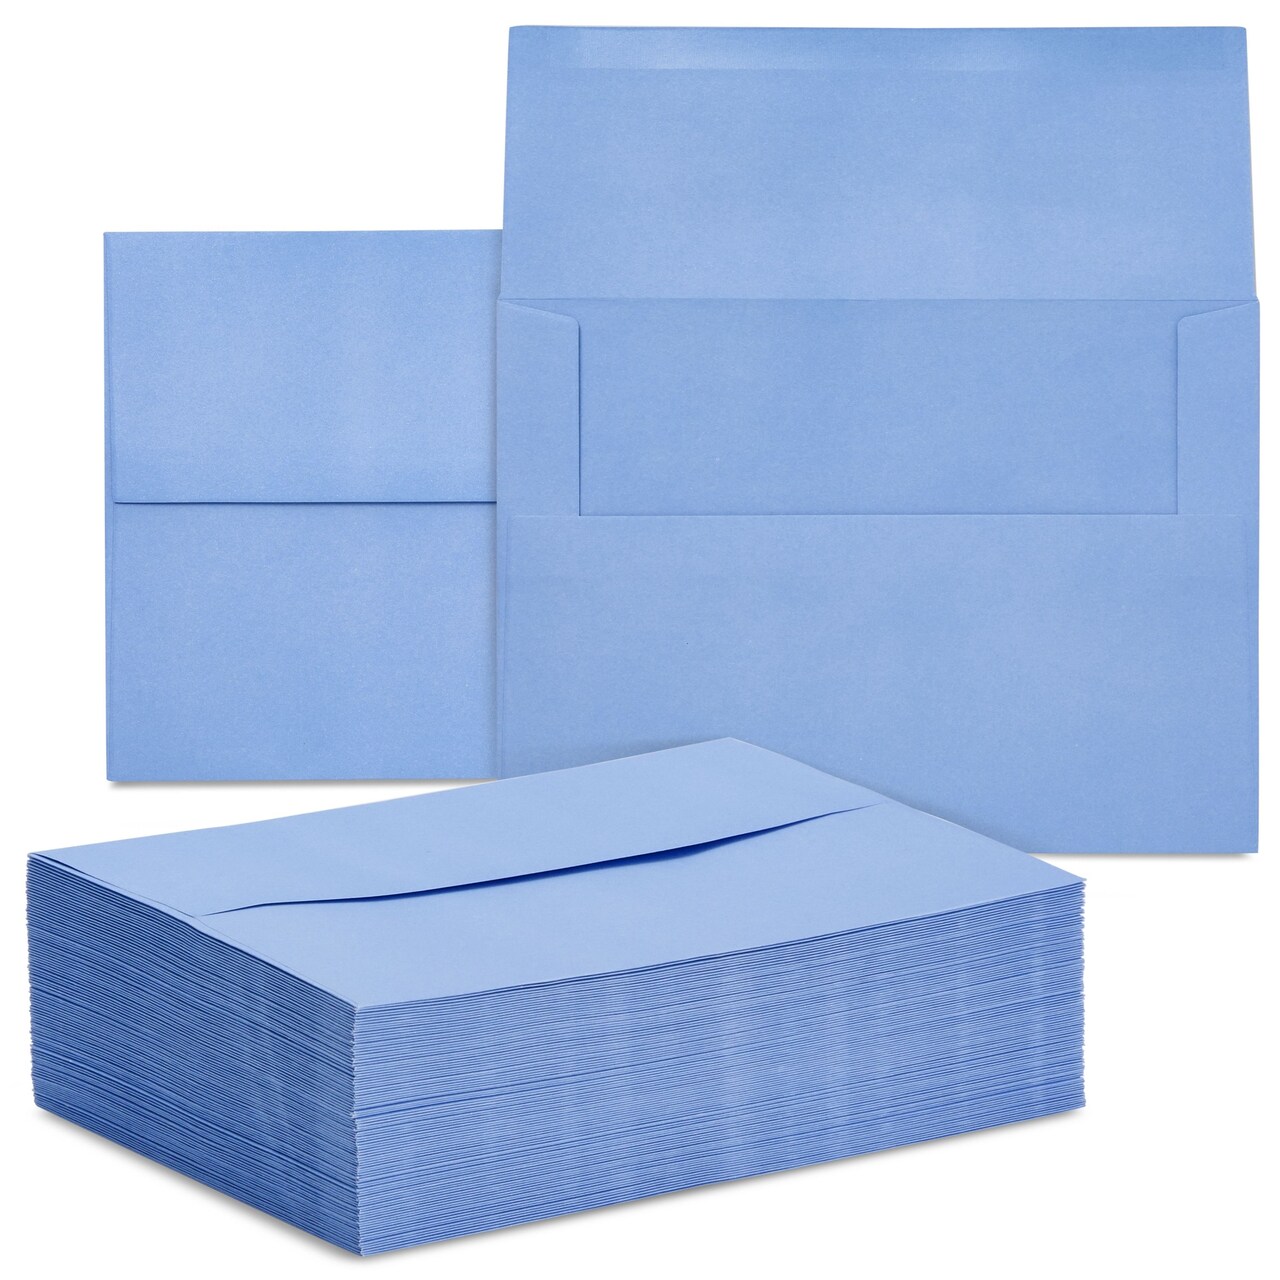 50 Pack Light Blue 5x7 Envelopes for Invitations, A7 Size for Mailing  Greeting Cards, Wedding, Bridal Shower, Peel and Stick Seal